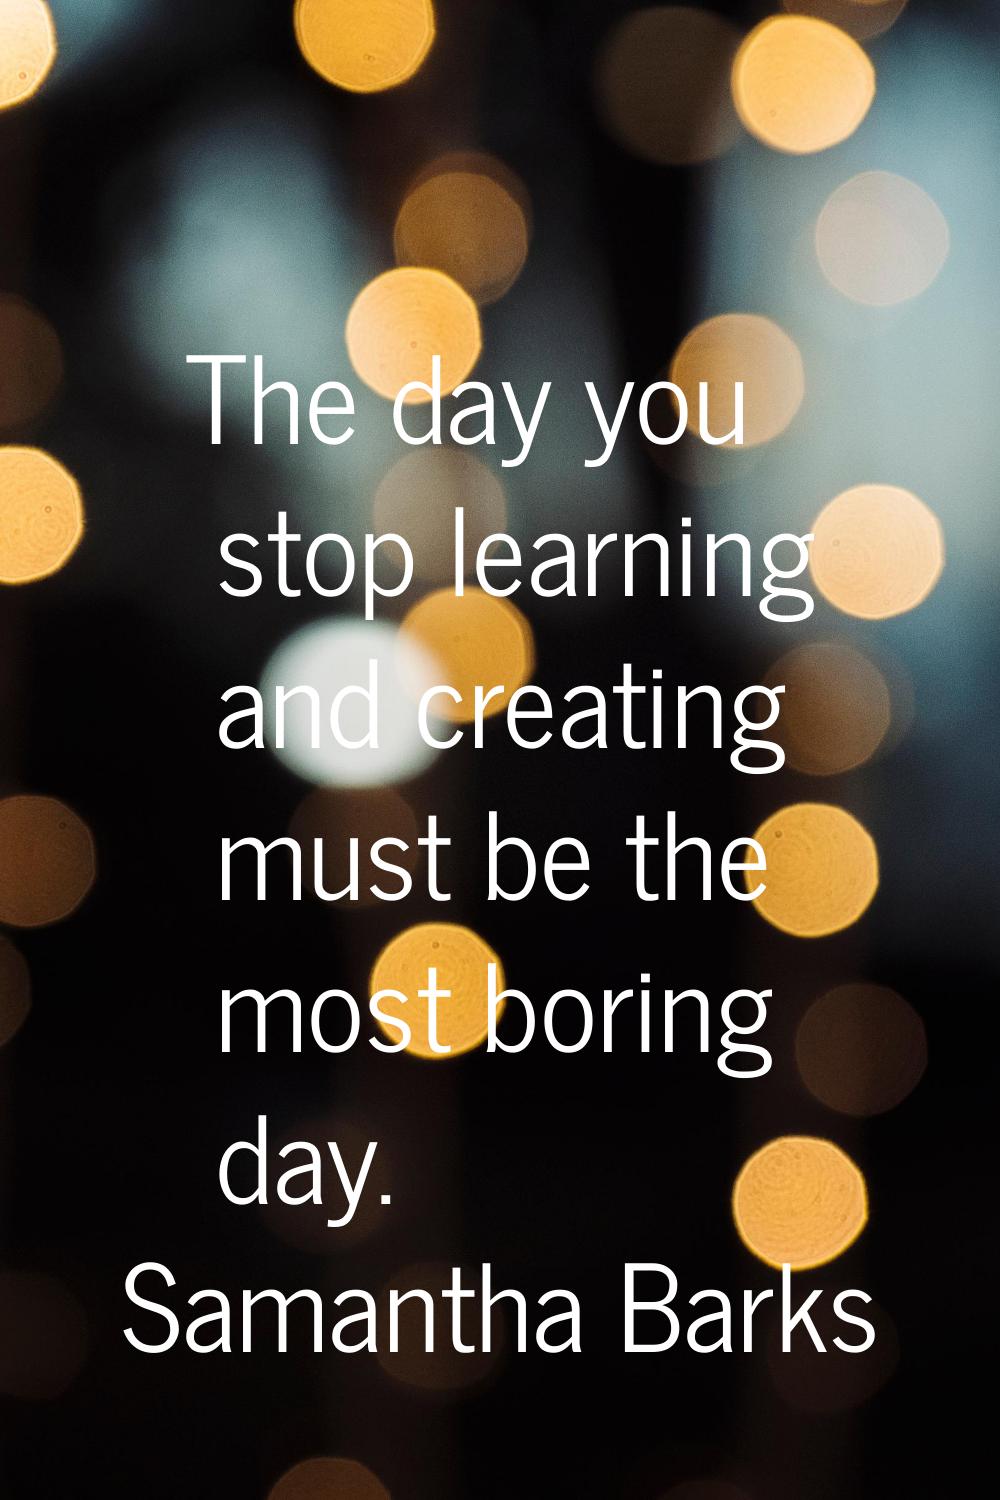 The day you stop learning and creating must be the most boring day.